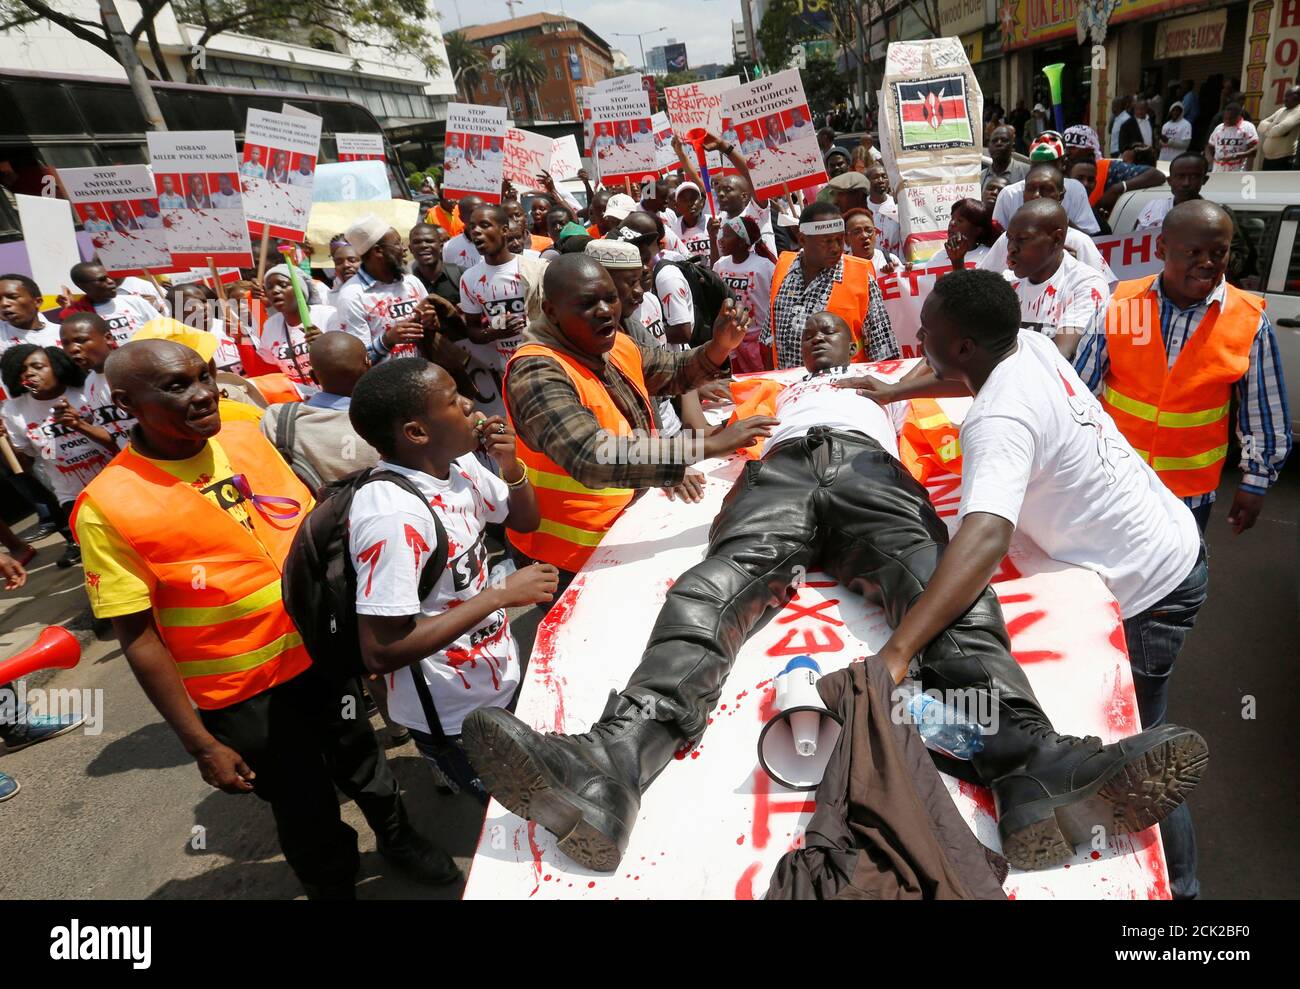 A member of the civil society lies on top of a mock coffin stained with mock blood, as others chant slogans during a protest dubbed 'Stop extrajudicial killings' on the killing of human rights lawyer, Willie Kimani, his client and their driver in Nairobi, Kenya, July 4, 2016. REUTERS/Thomas Mukoya     TPX IMAGES OF THE DAY Stock Photo